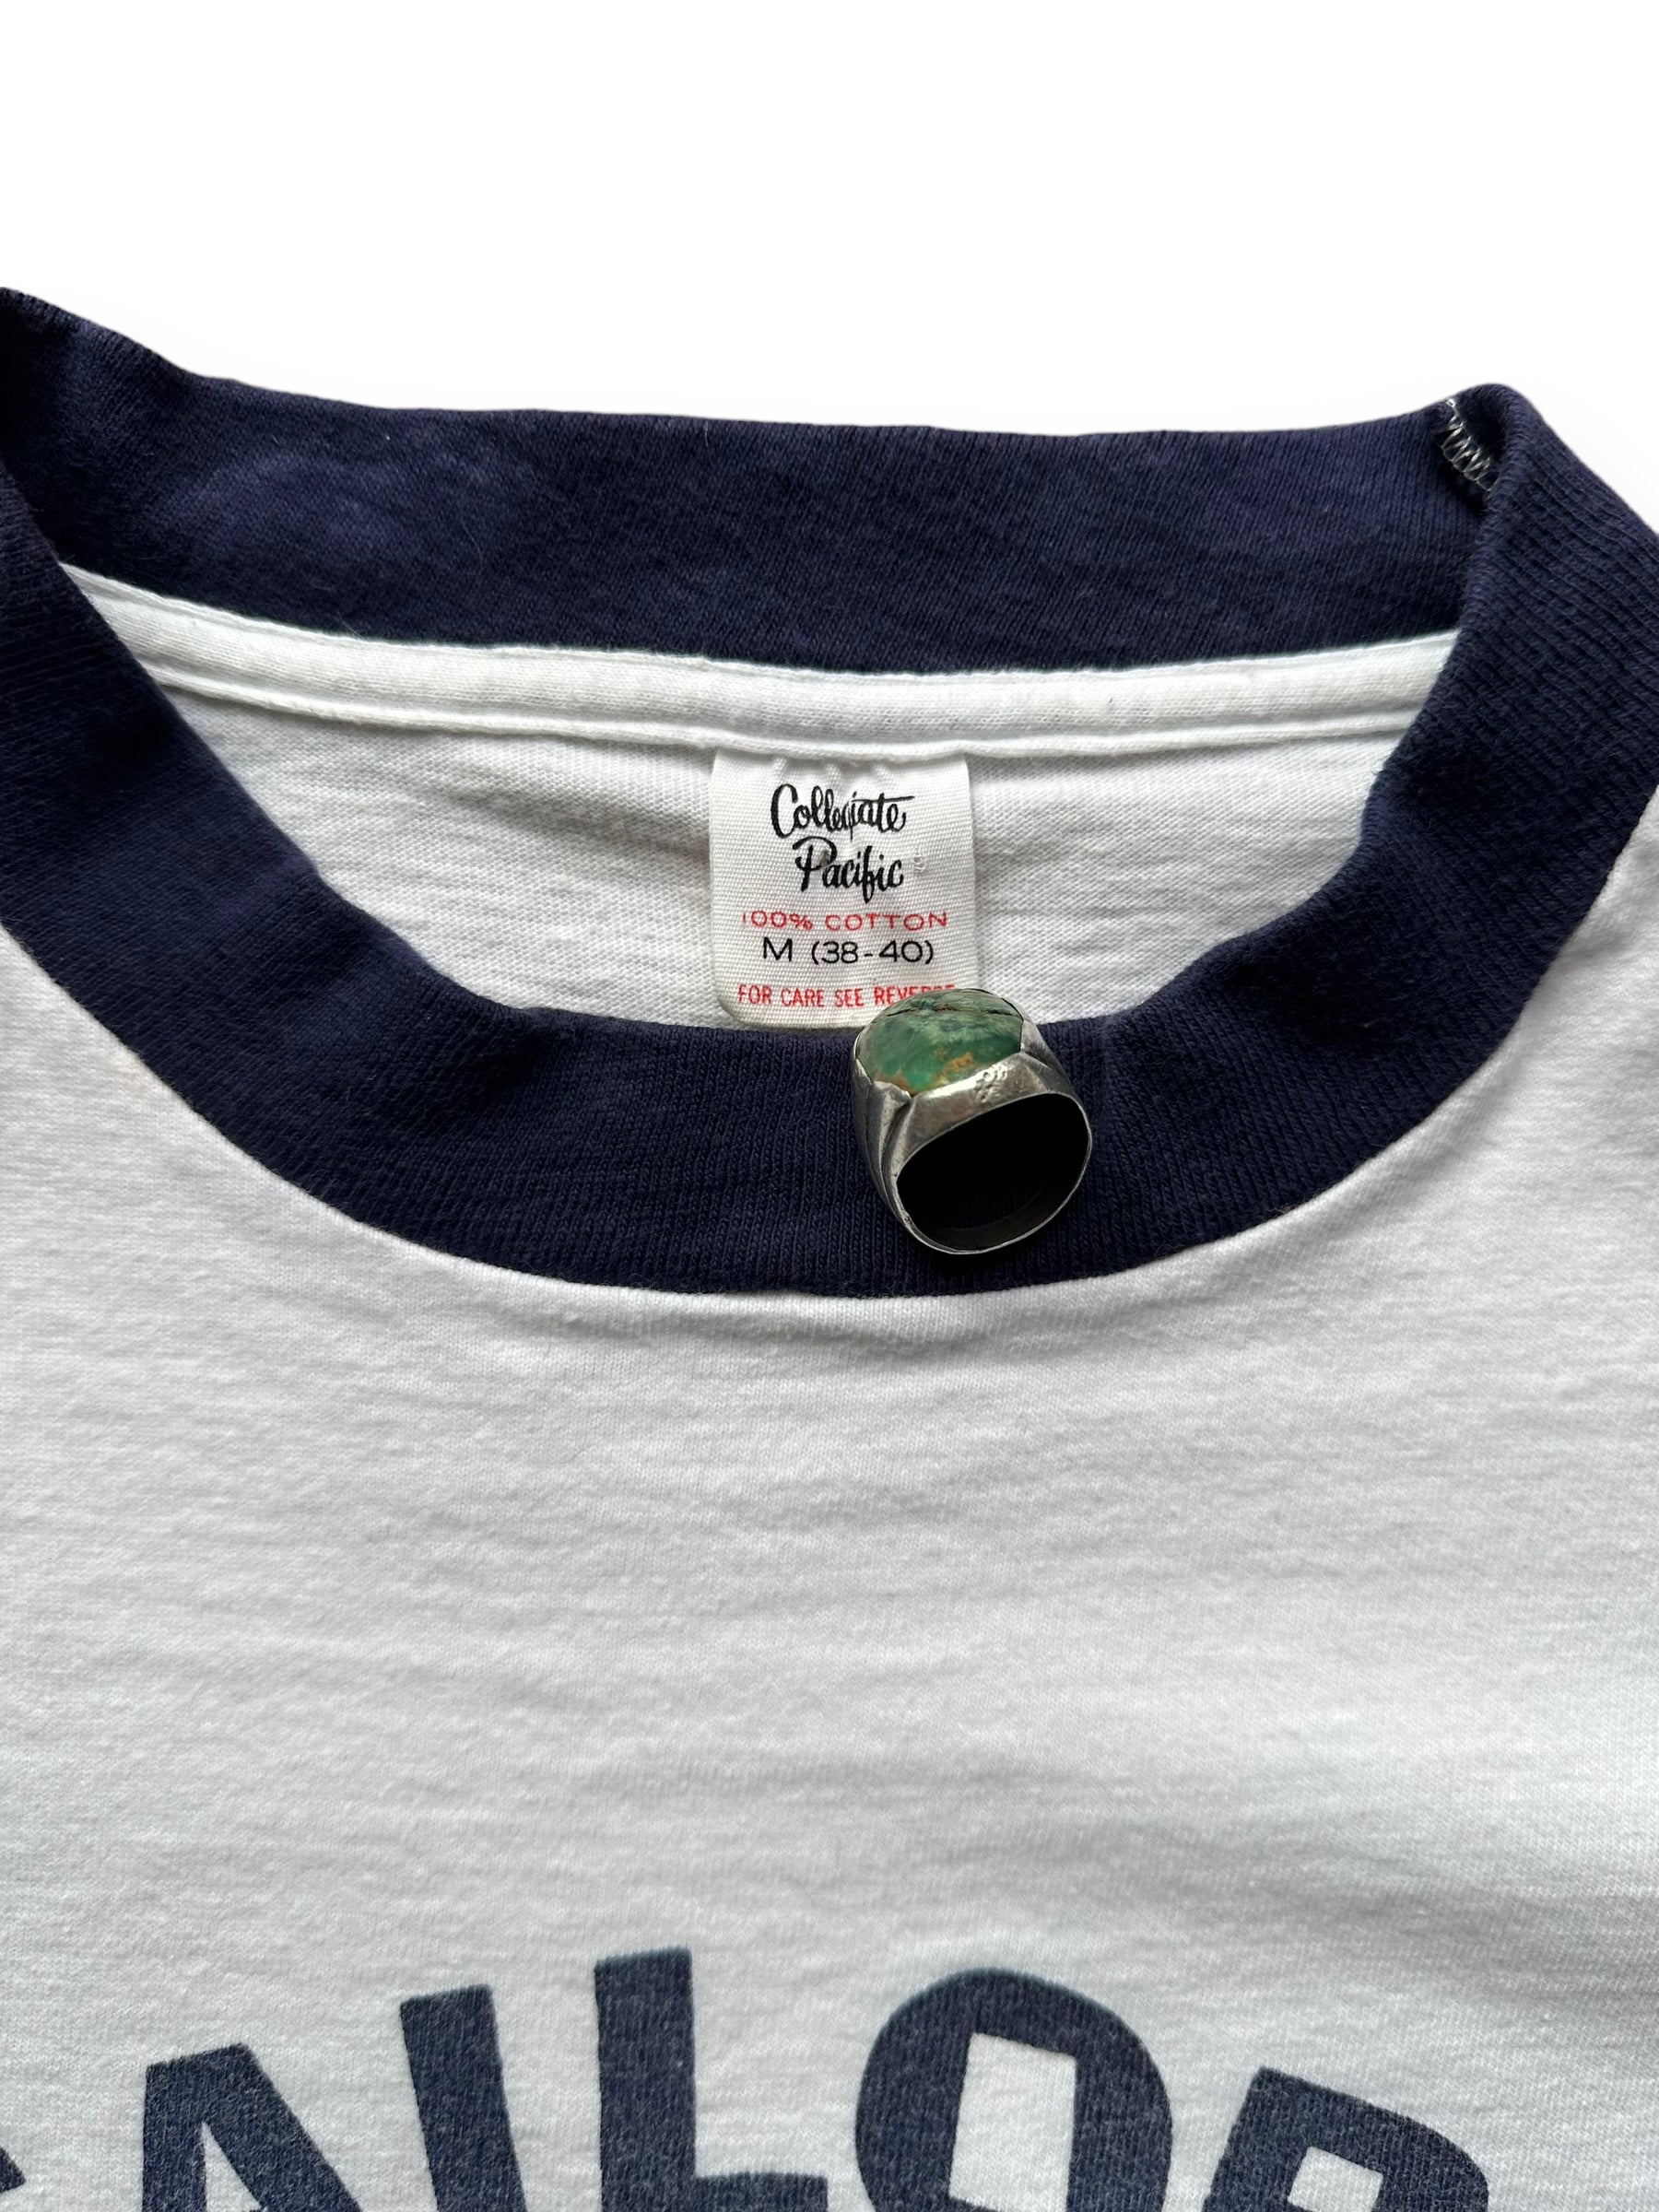 Tag View of Vintage Sailors Have More Fun Ringer Tee SZ M | Vintage T-Shirts Seattle | Barn Owl Vintage Tees Seattle